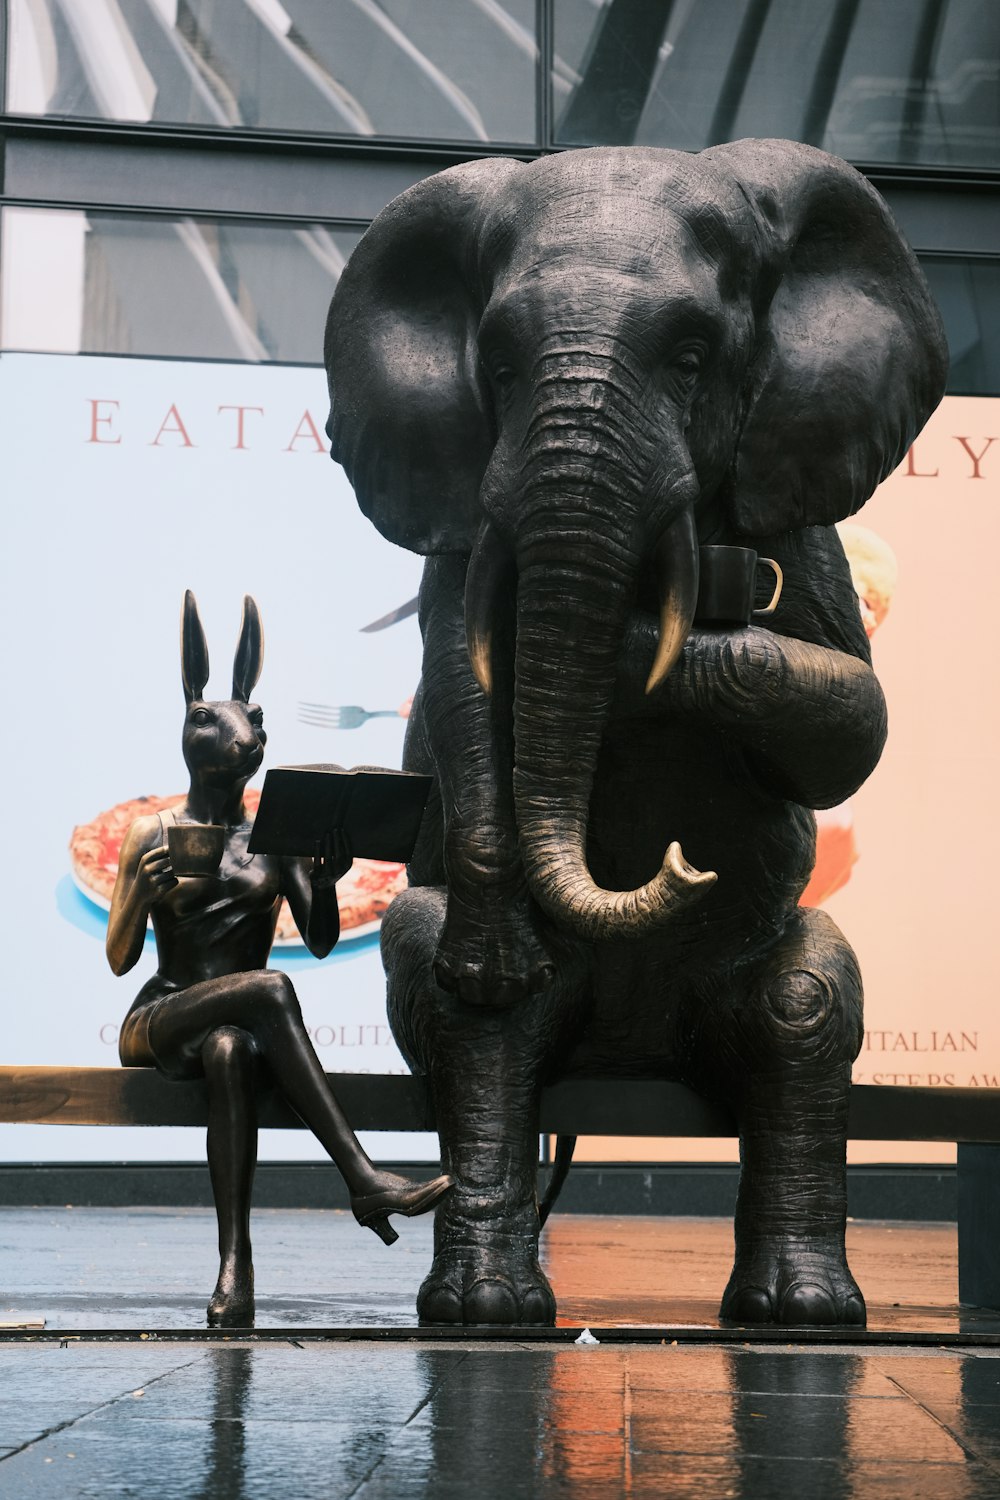 a statue of an elephant and a woman sitting on a bench